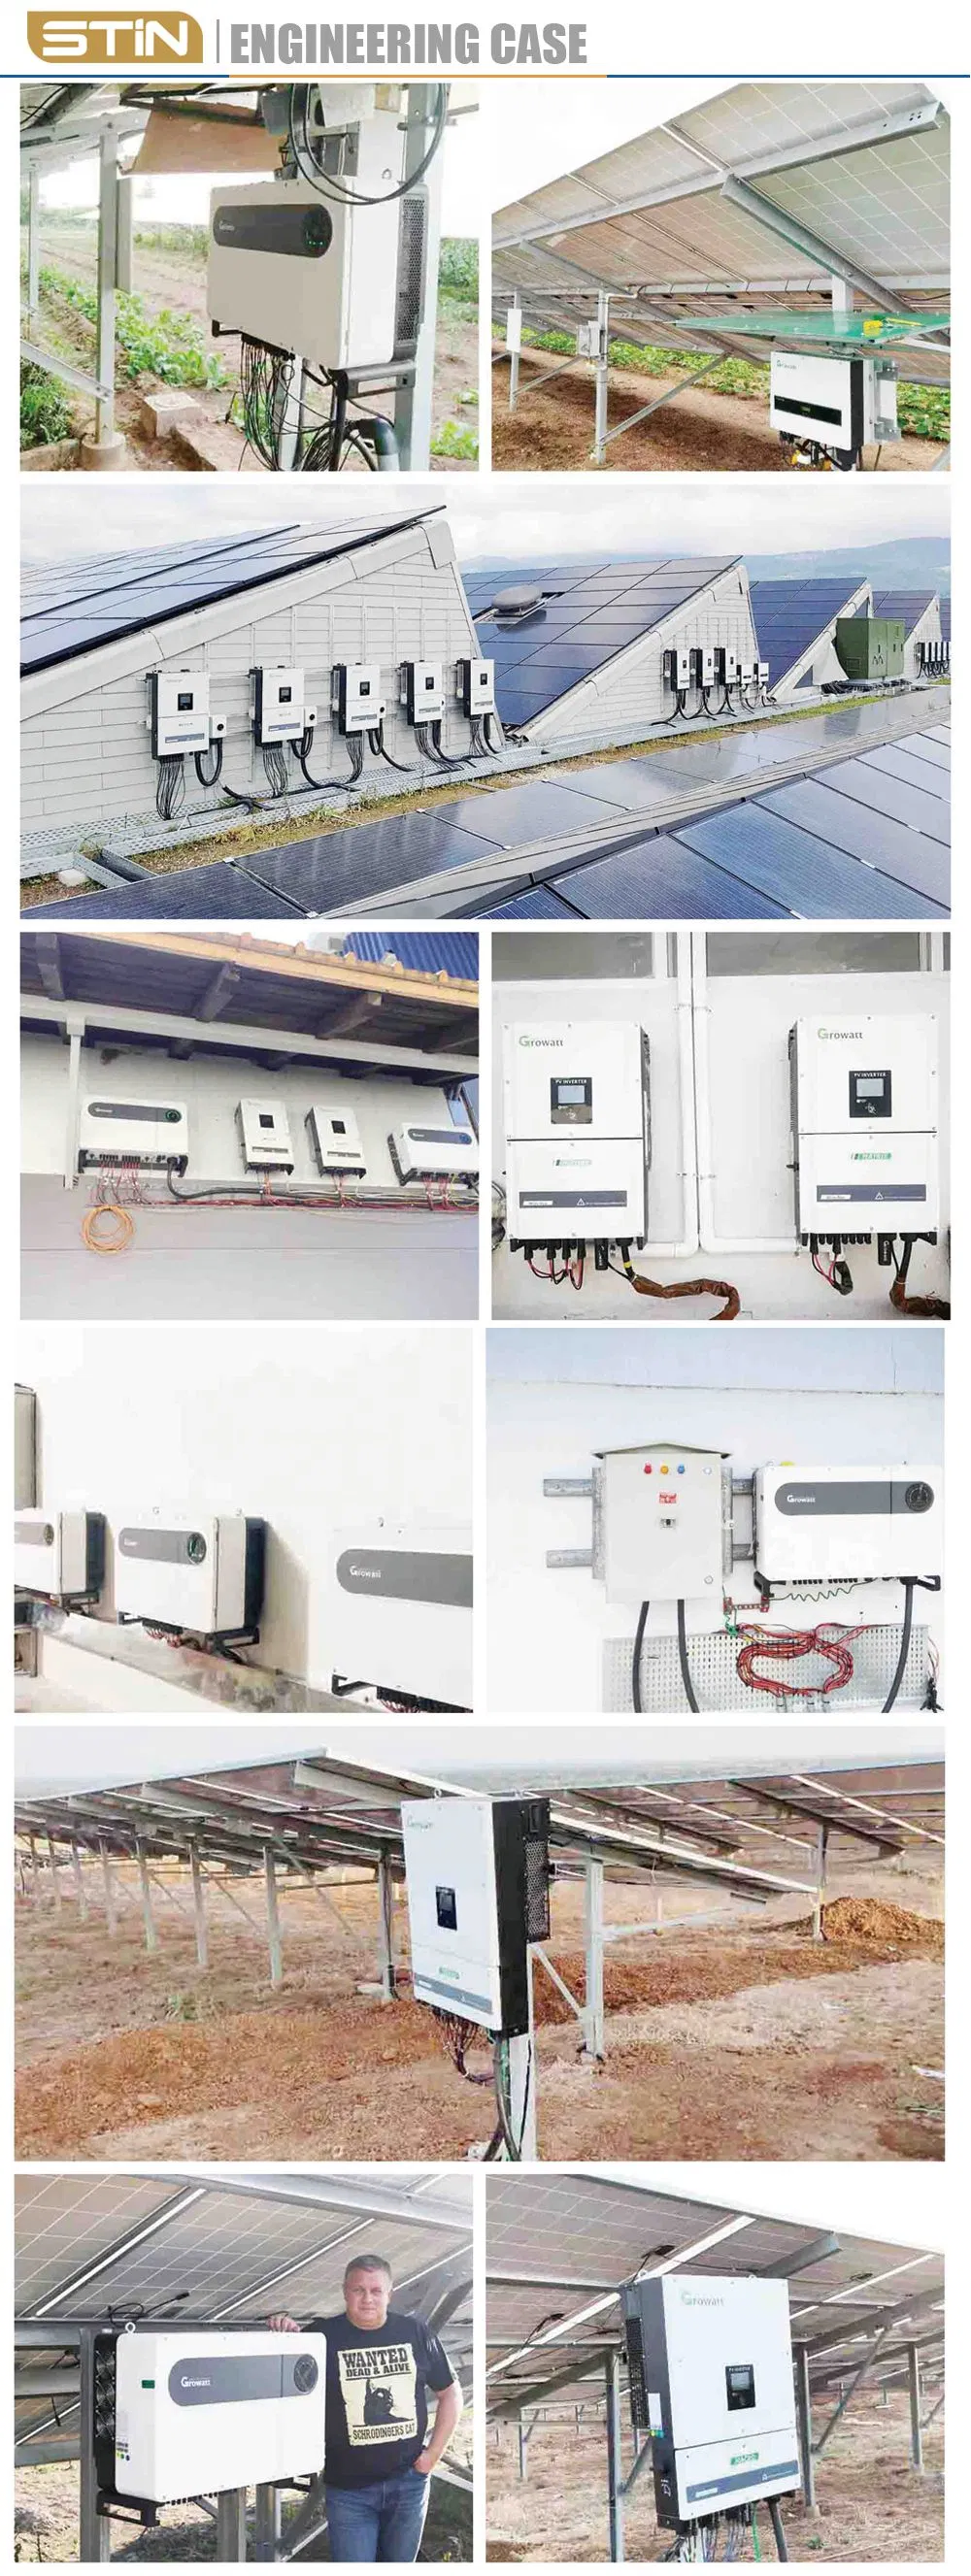 Photovoltaic Power Station 5kw Solar System Power Plant